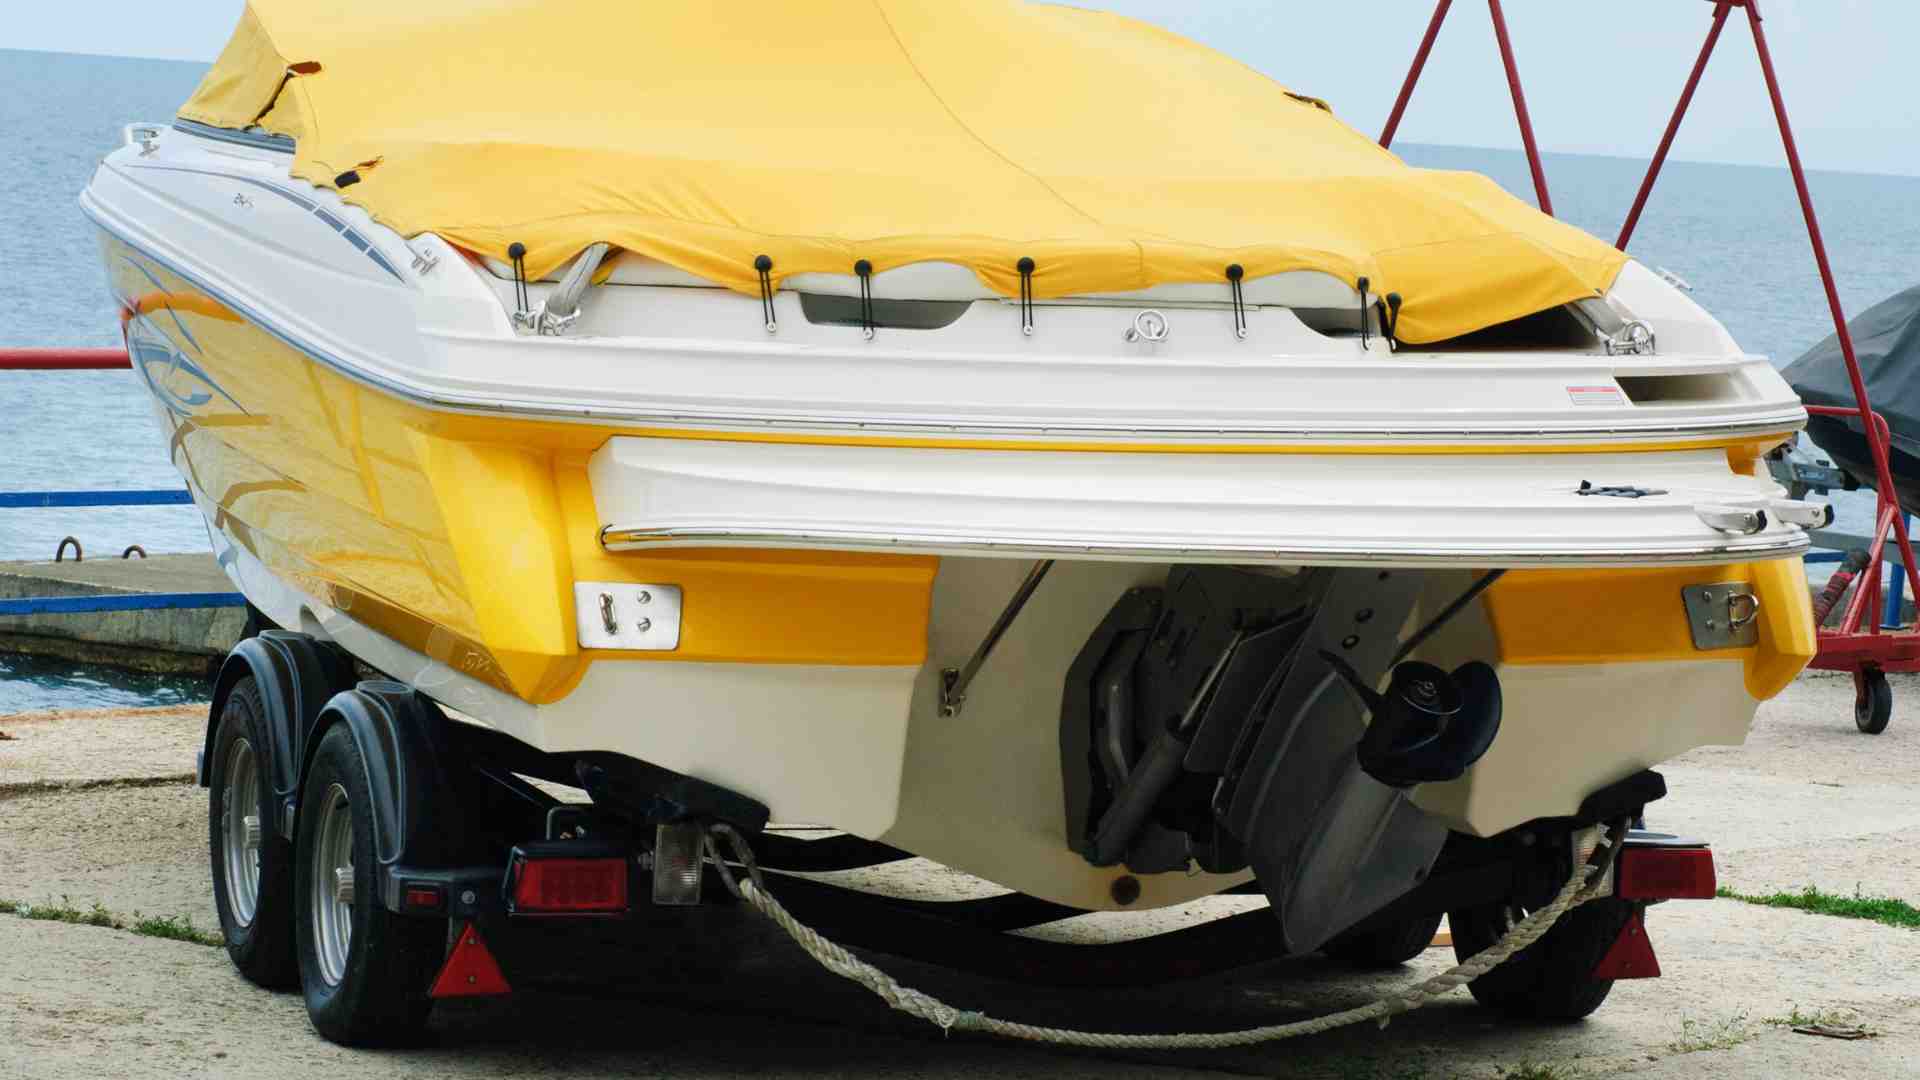 What are the steps to properly trailer a boat and launch it at a ramp